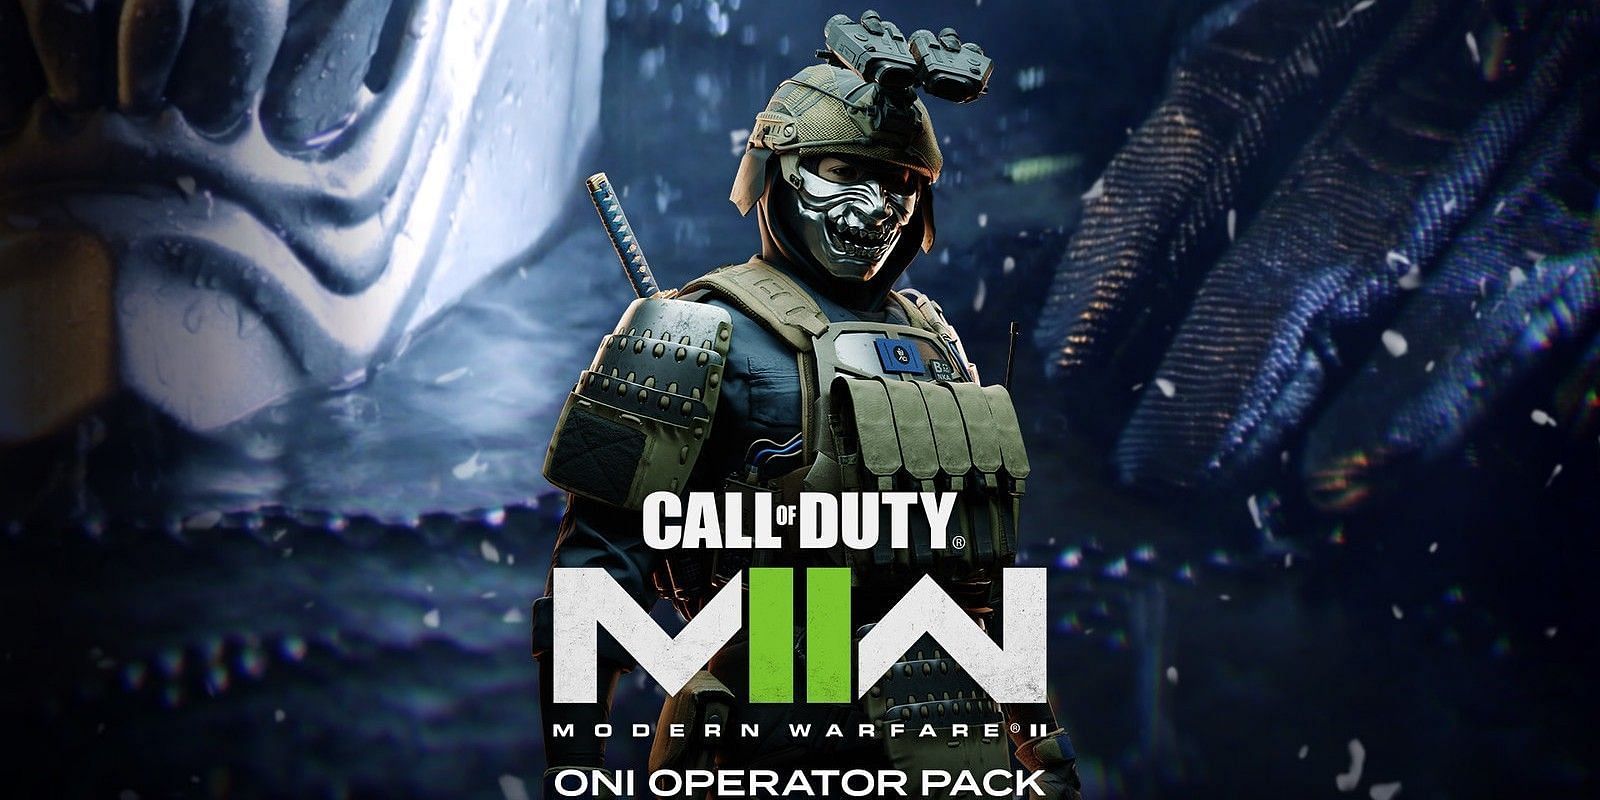 Exclusive Oni Operator Pack for PlayStation players (Image via Activision)